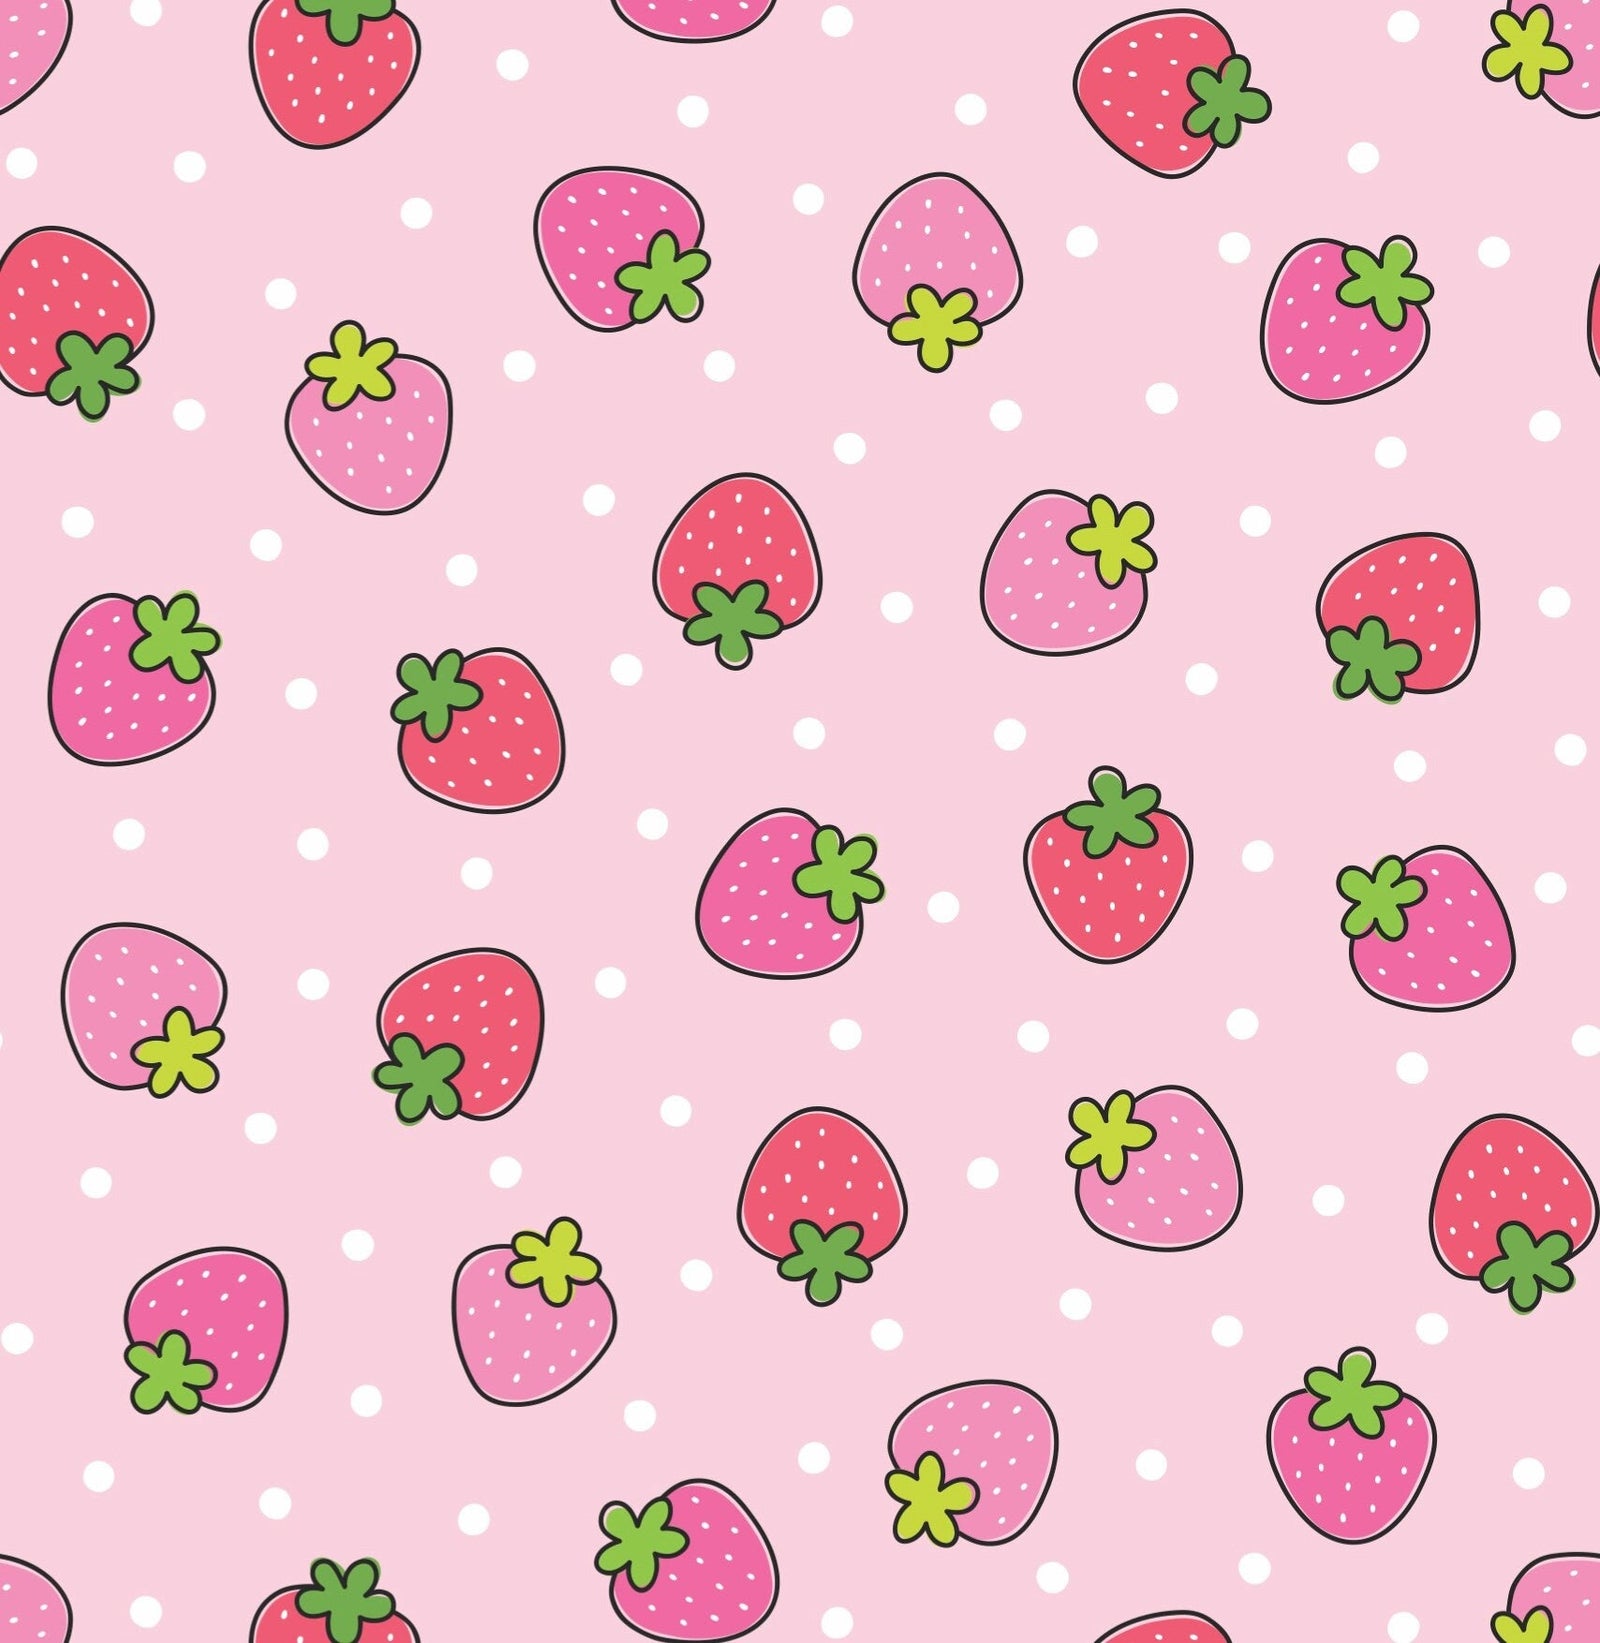 Pretty Pink Wrapping Paper Gift Wrap Cute Strawberry Girls' Birthday Present